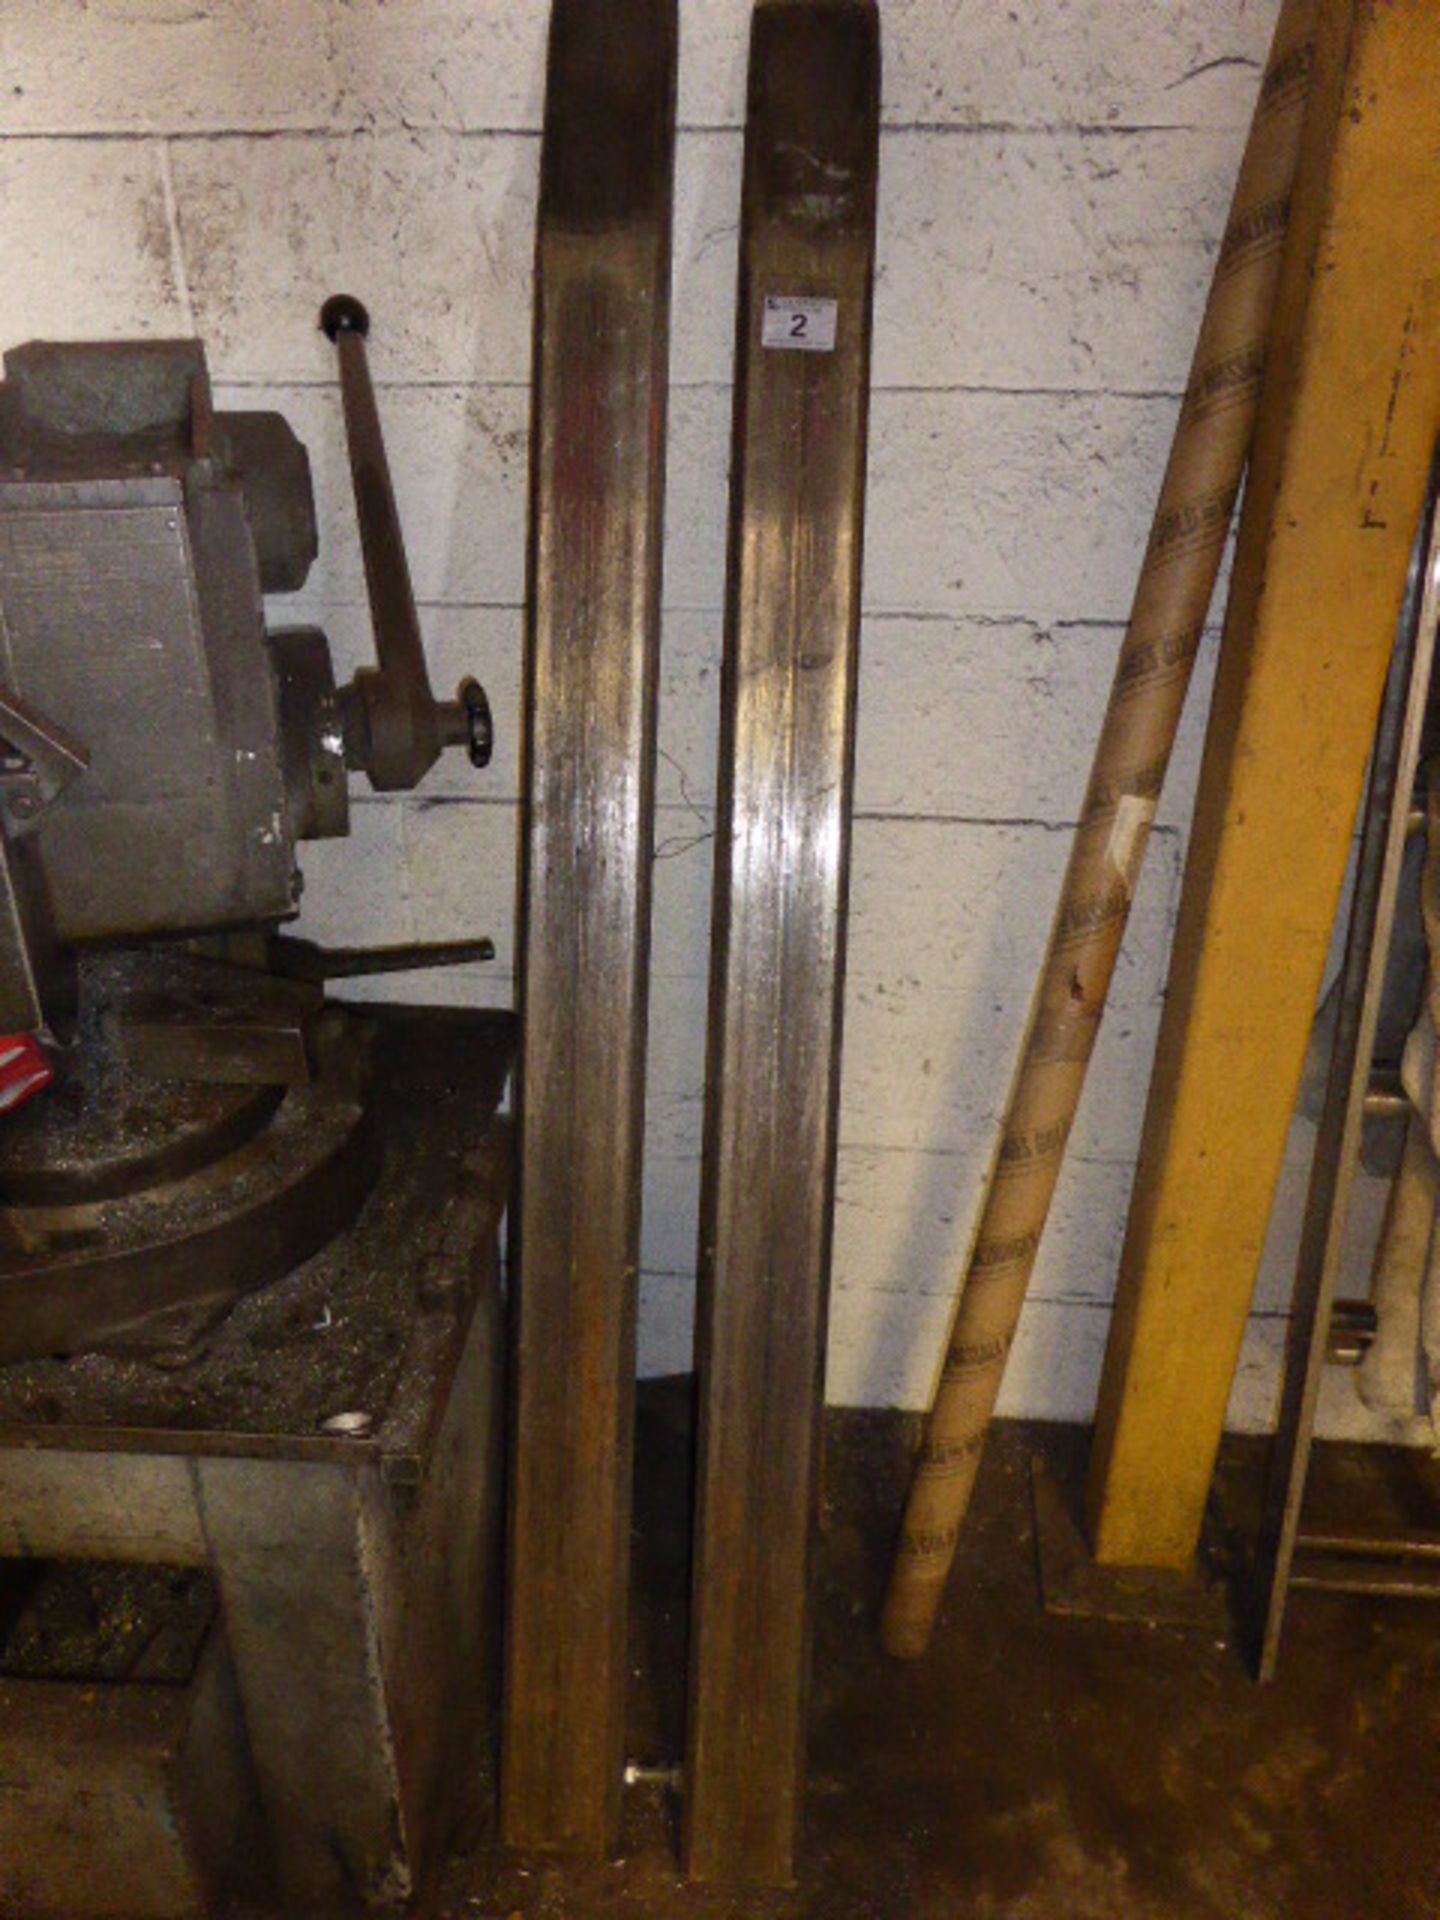 A pair of forklift extensions